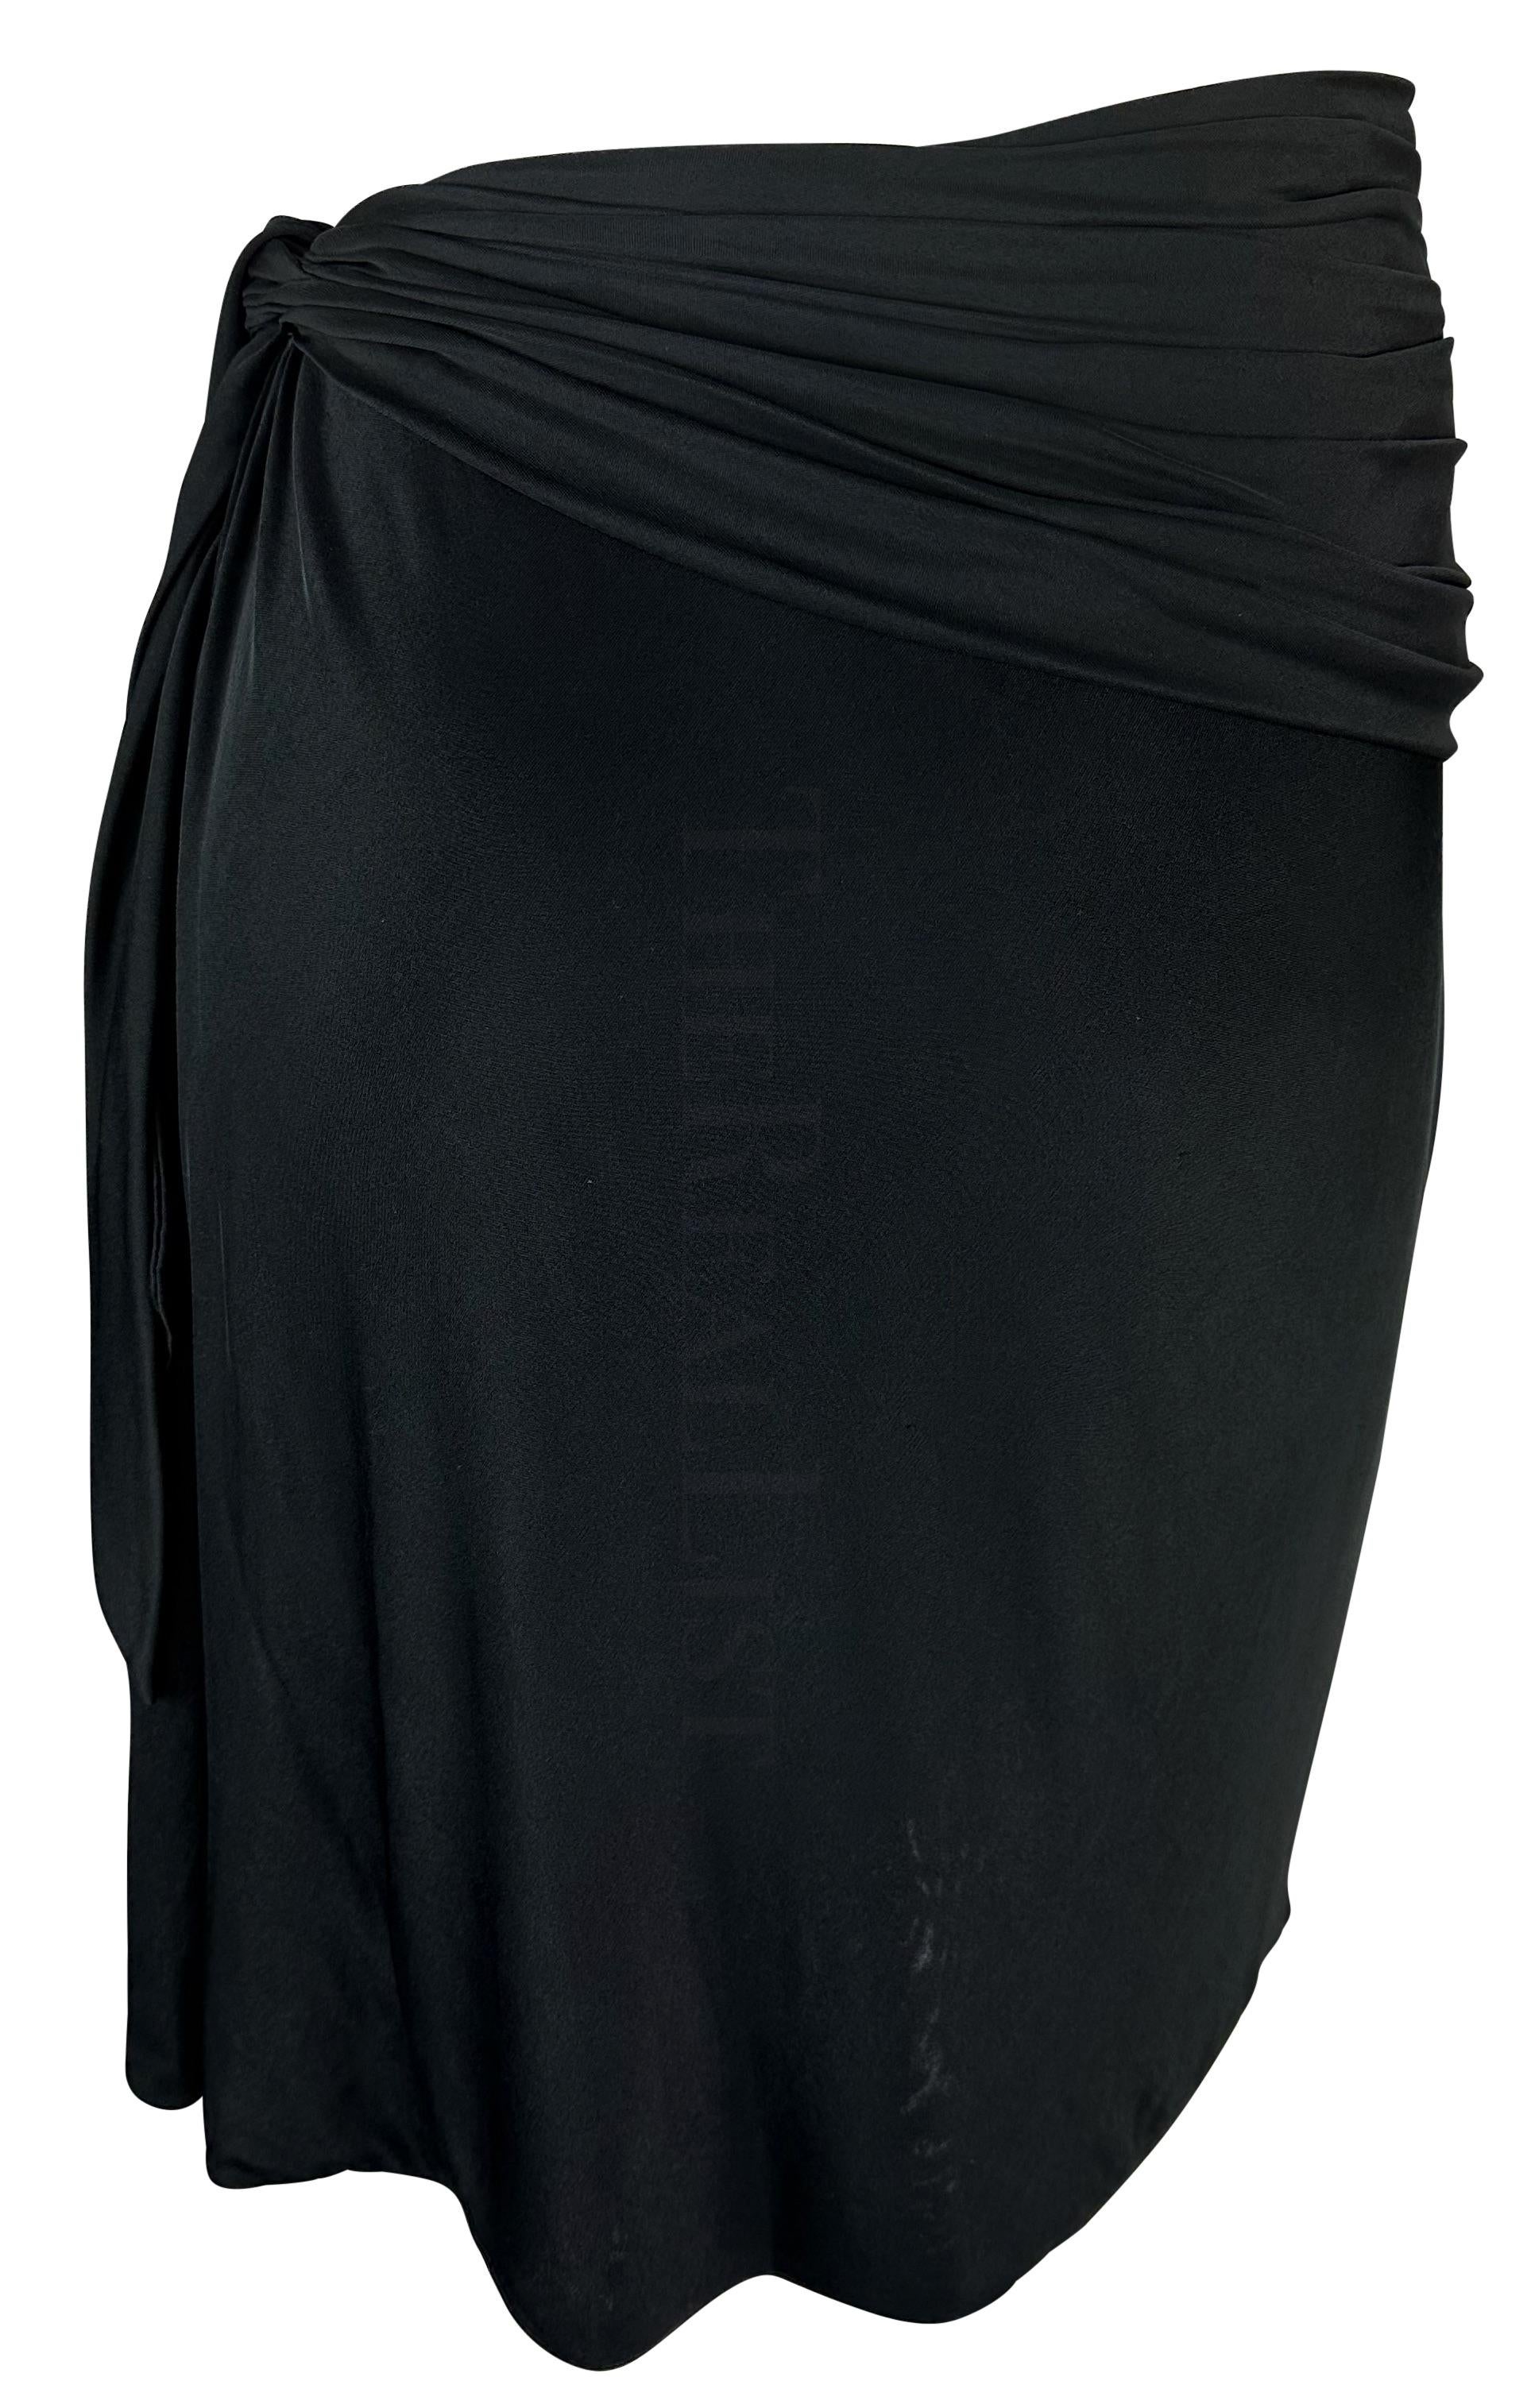 2000s Gianni Versace by Donatella Black Wrap Slit Asymmetric Y2K Skirt In Excellent Condition For Sale In West Hollywood, CA